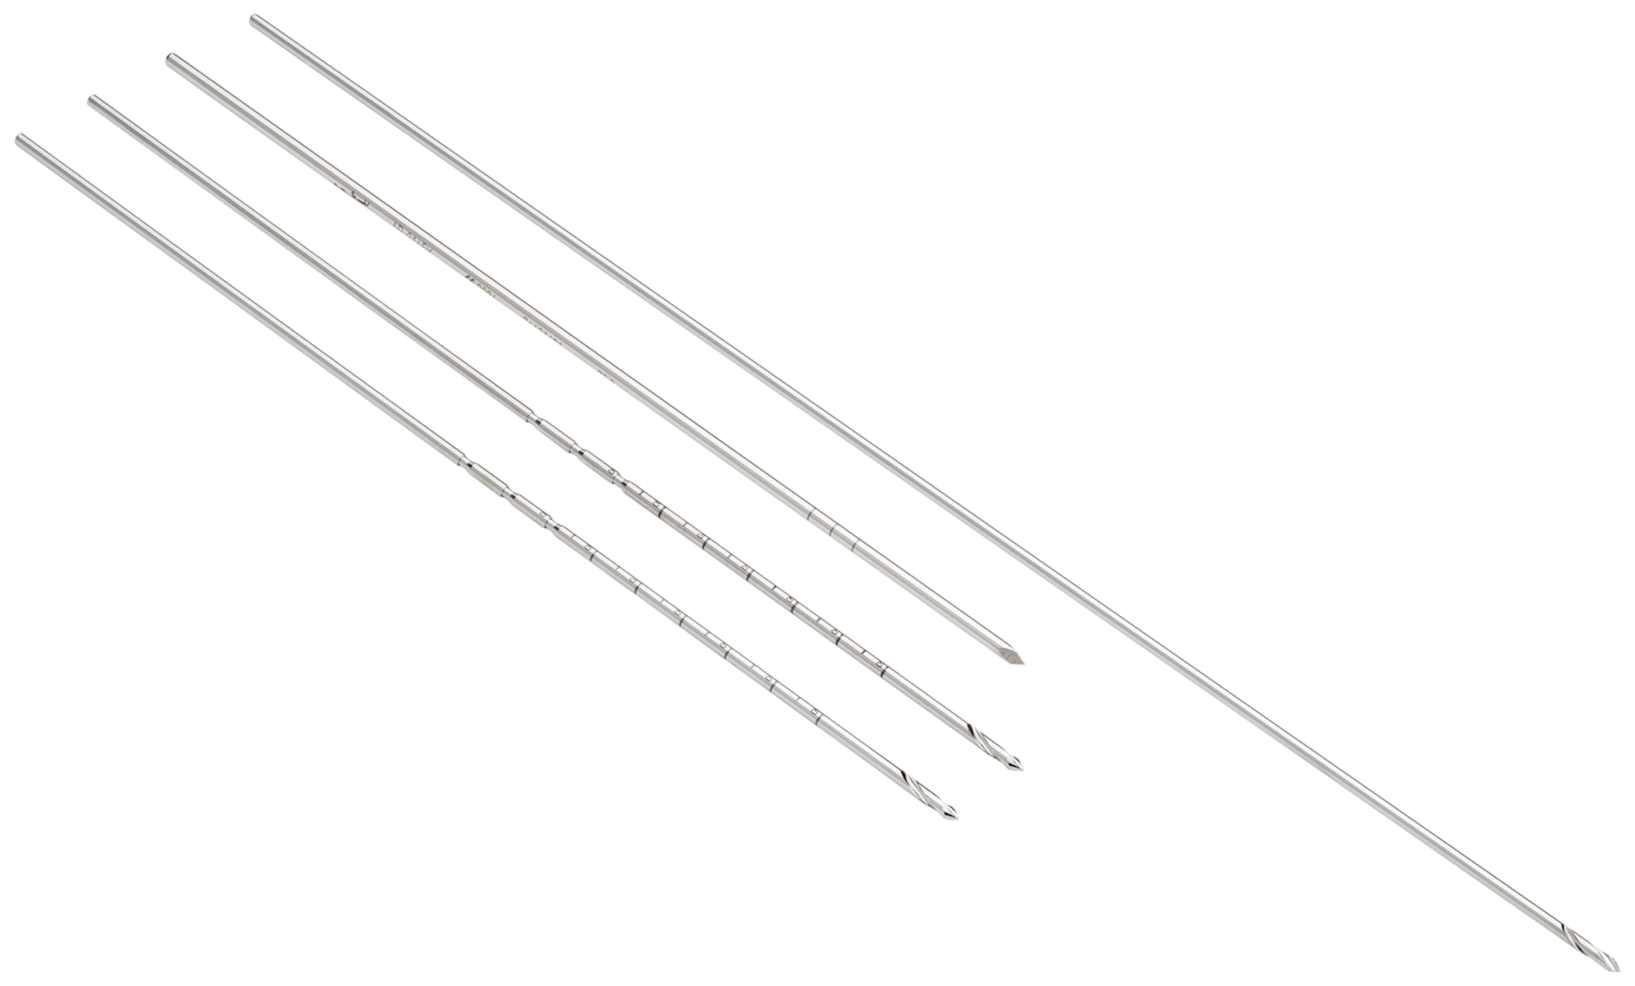 Pin Set, Univers Revers, sterile (Includes 2.4 mm Drill Tip Guide Pin, 2.4 mm Osteotomy Guide Pin and 2.8 mm Guidewire)